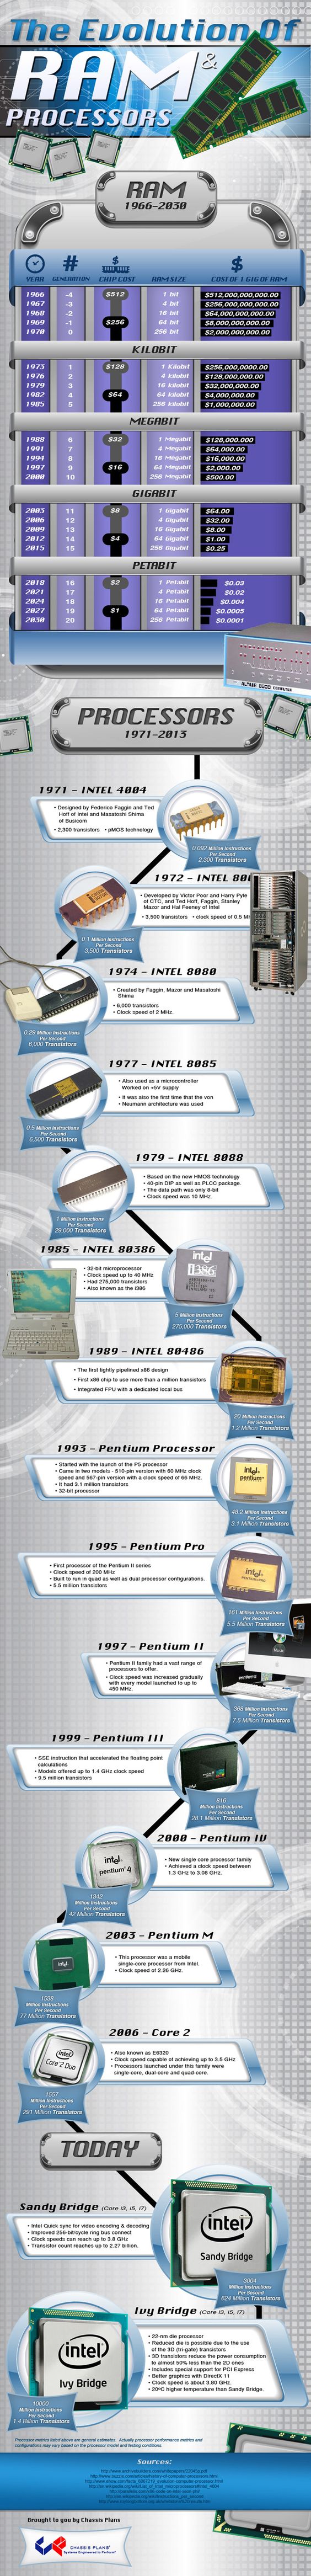 Good infographic, missing two things: -Core2 was the first Intel 64 bit processor -New Haswell Architecture